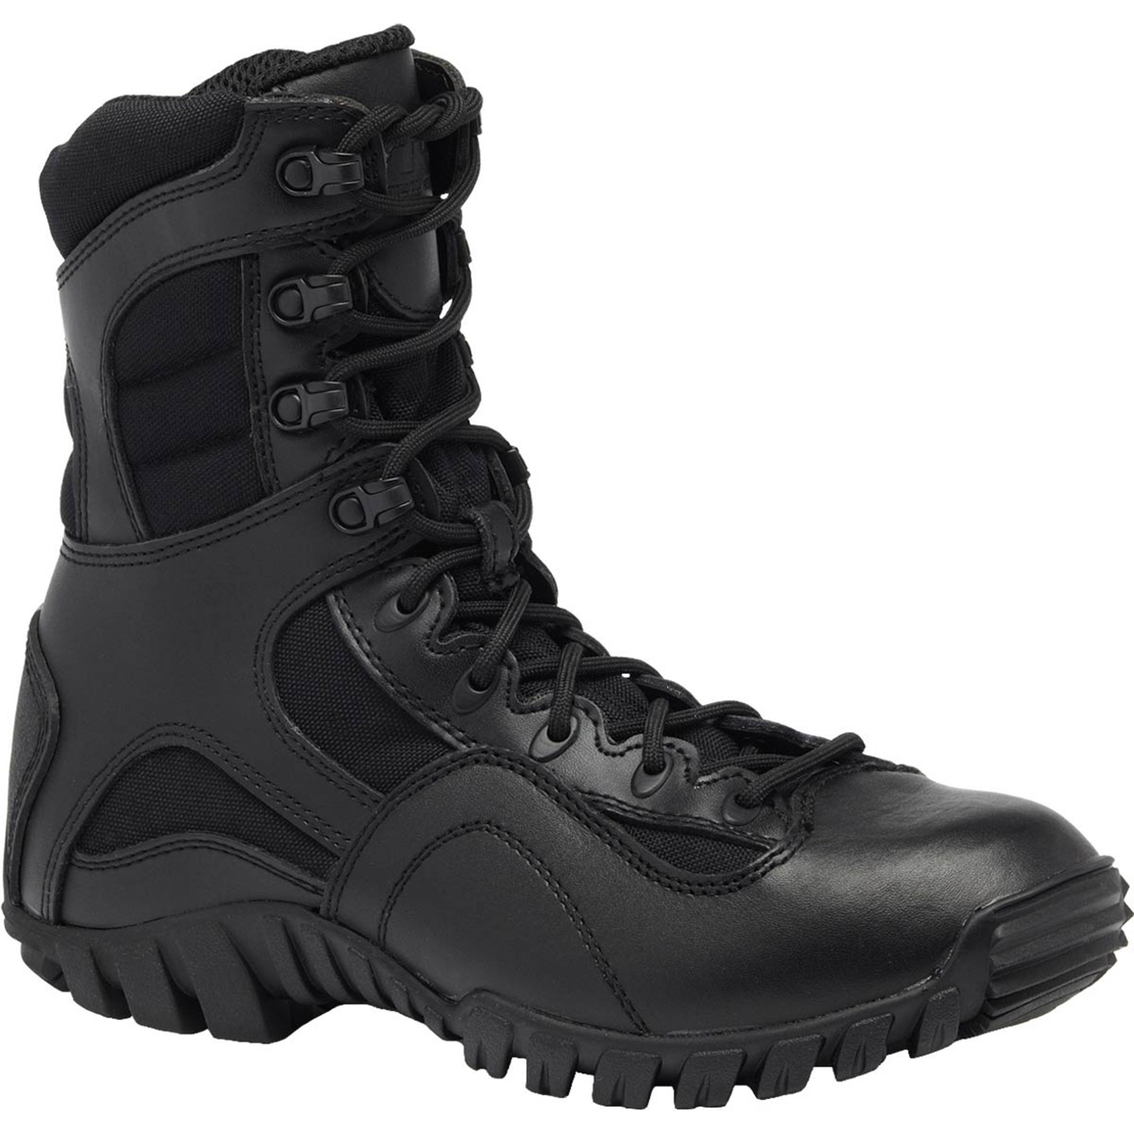 Tactical Research By Belleville Khyber Tr960 Boots | Boots | Shoes ...